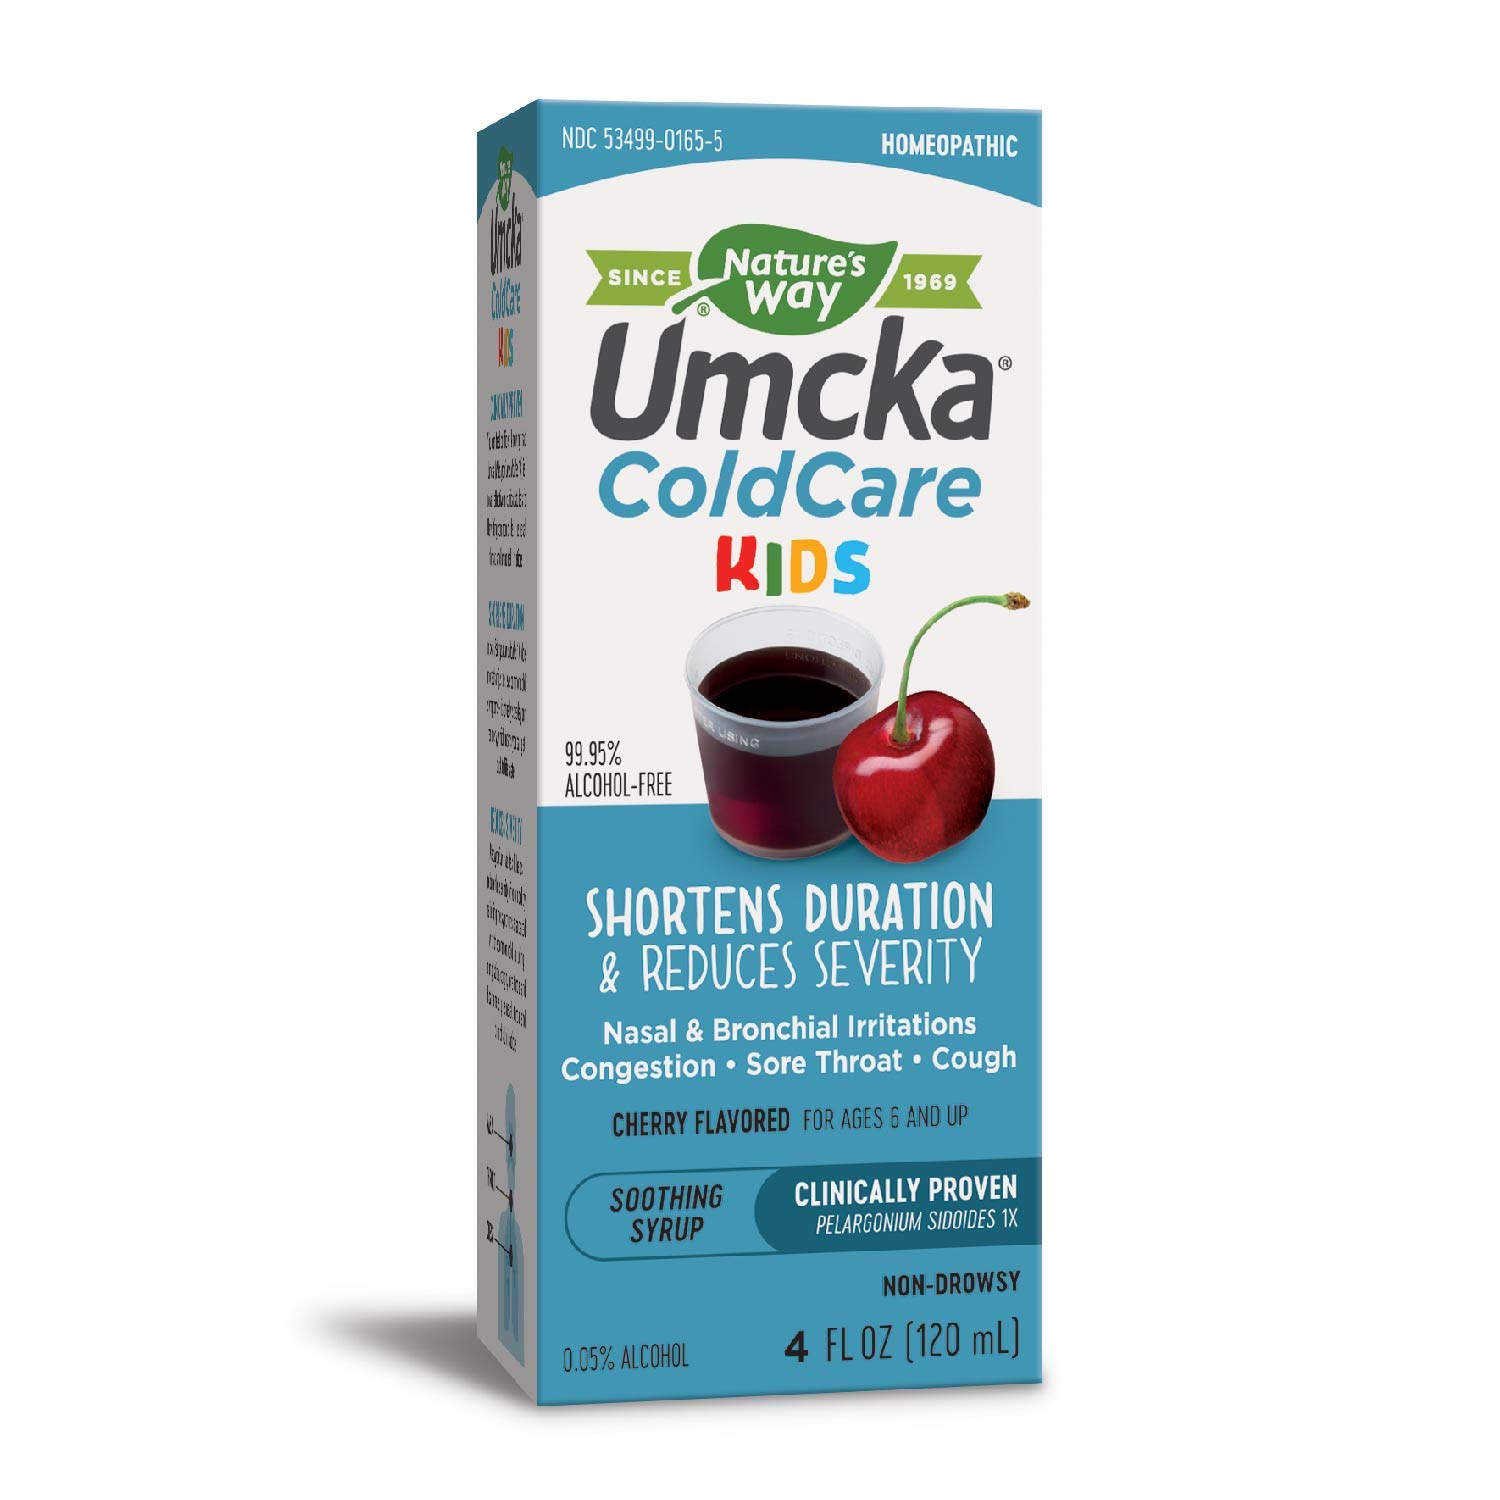 Nature’s Way ColdCare Kids Cough Syrup